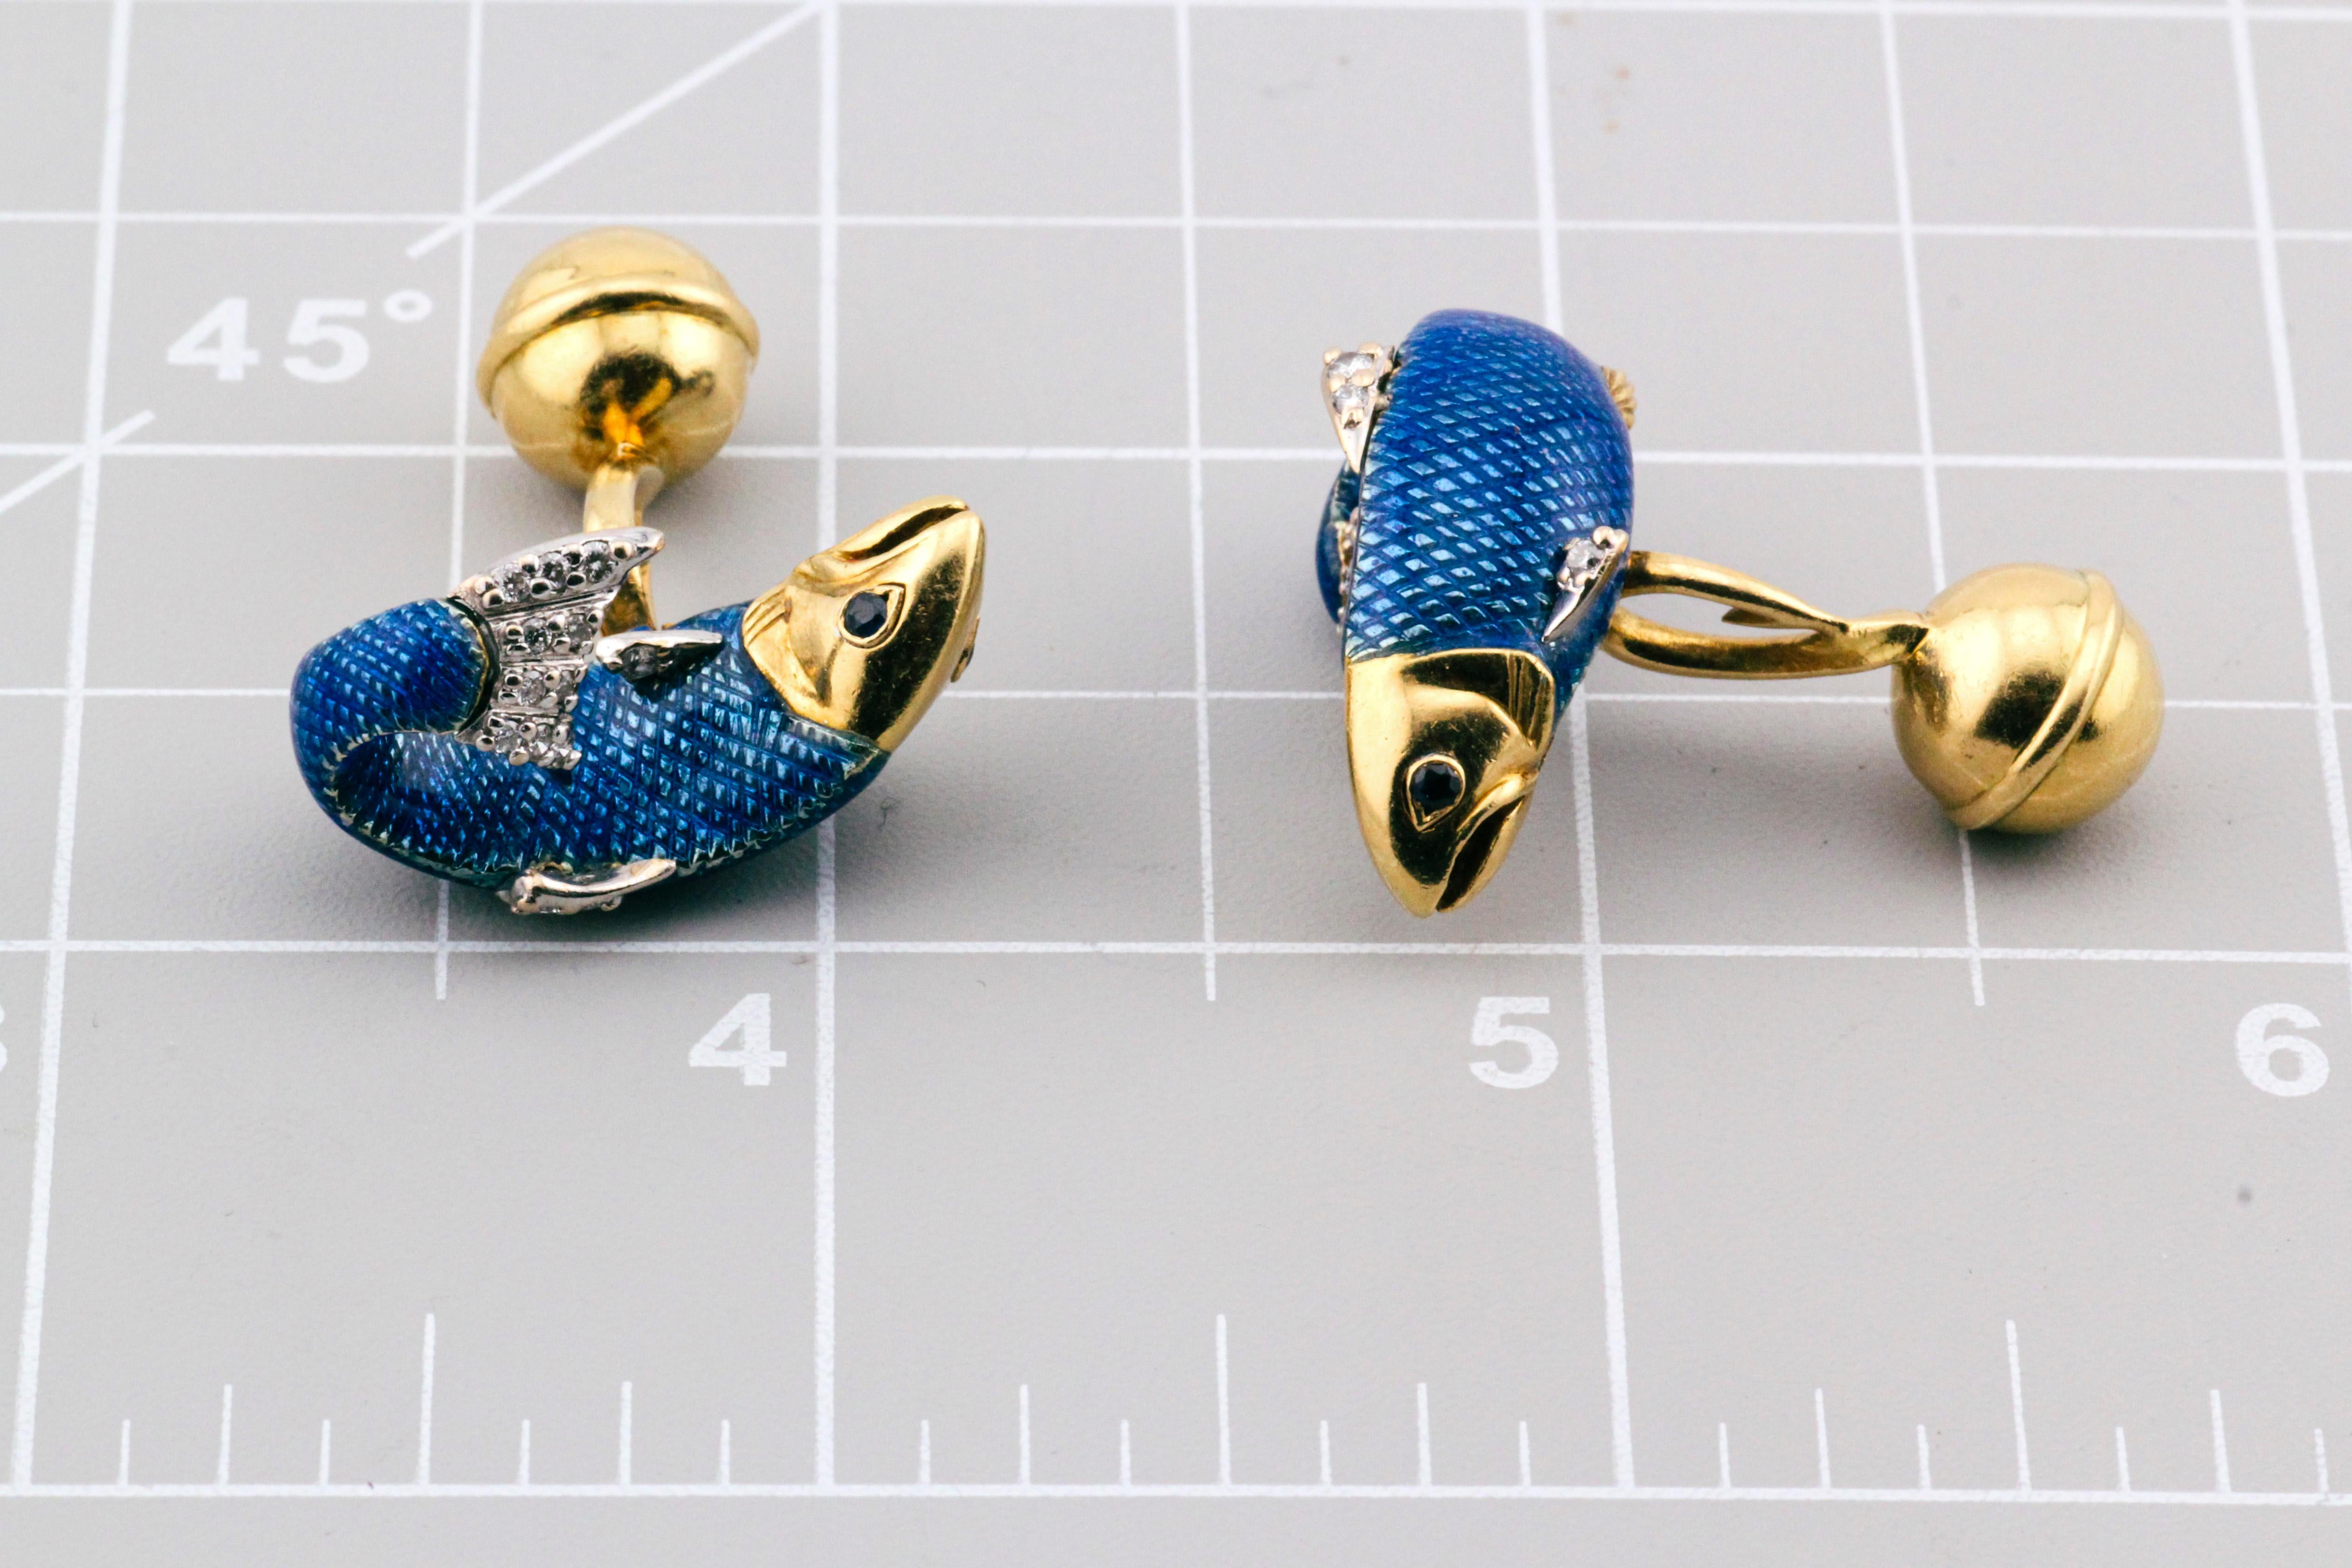 Unveiling an Aquatic Treasure: Tiffany & Co. Diamond, Sapphire, and Enamel Fish Cufflinks

Embrace a touch of aquatic whimsy and timeless elegance with these captivating Tiffany & Co. fish cufflinks. Crafted from a luxurious blend of materials –